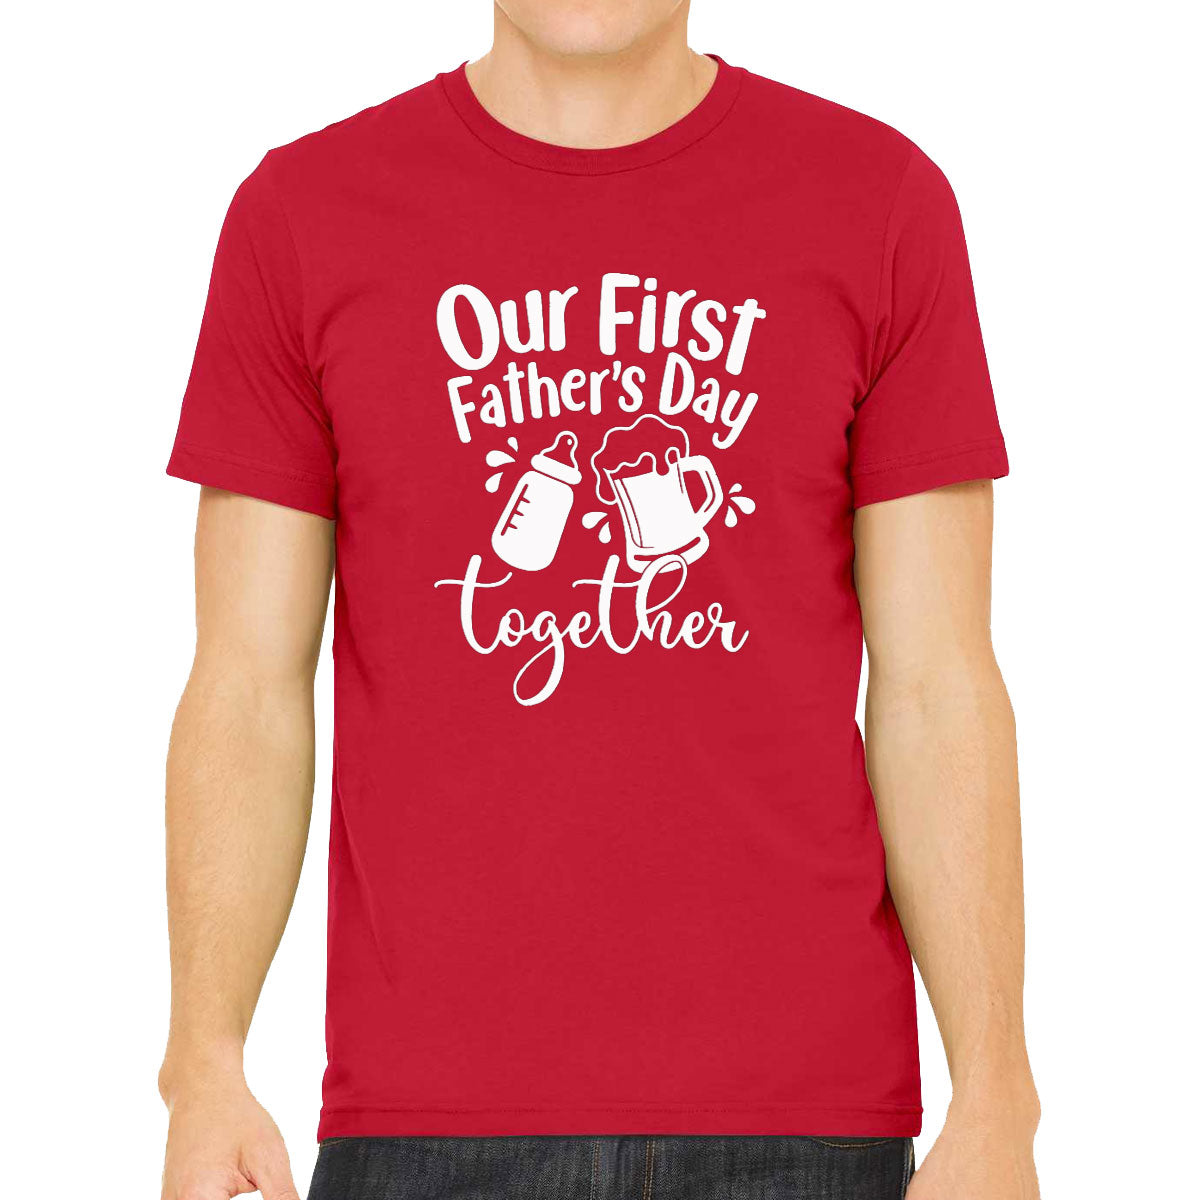 Our First Father's Day Together Men's T-shirt